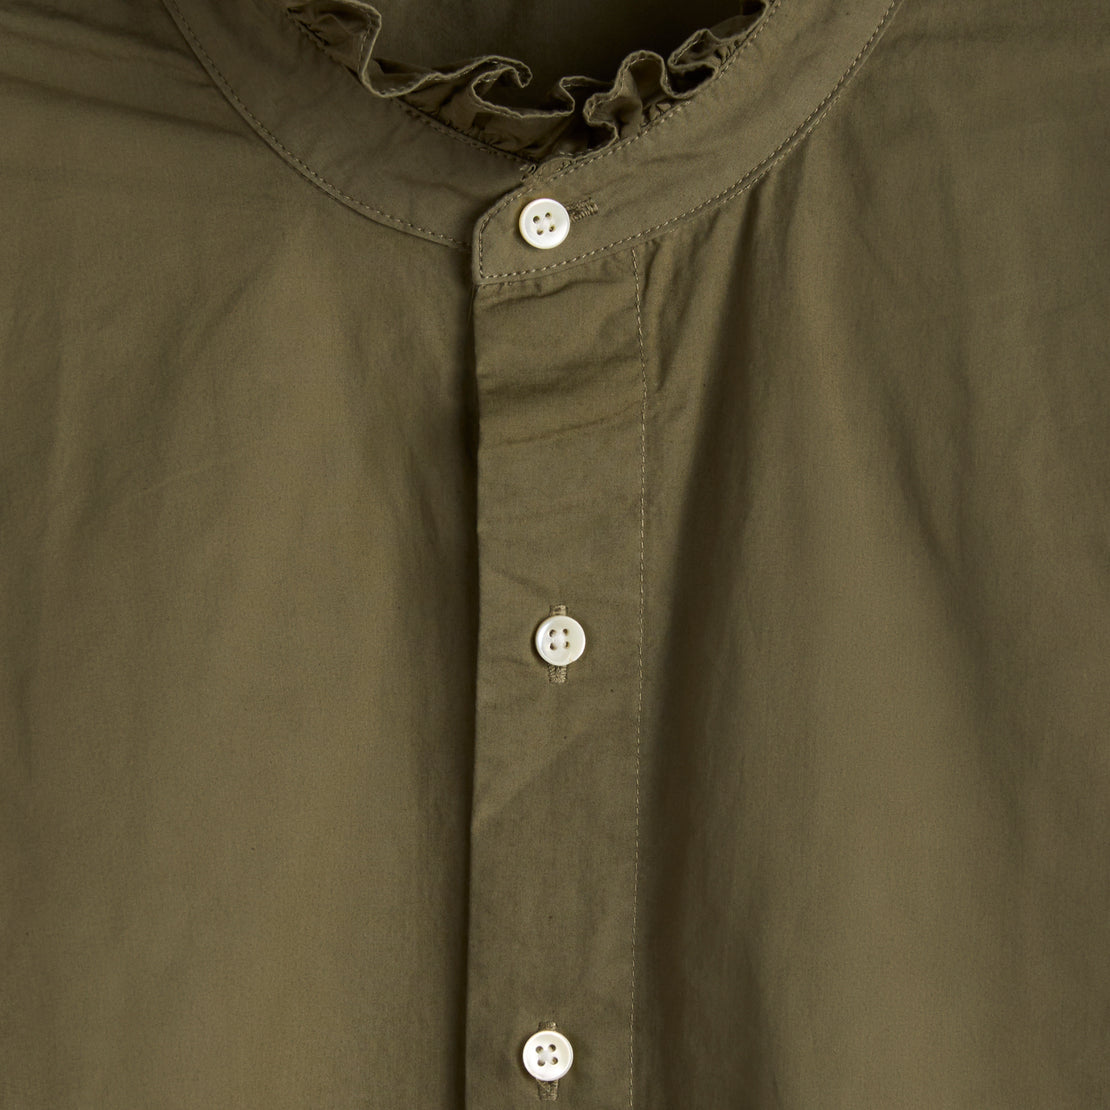 Easy Ruffle Shirt - Dusty Olive - Alex Mill - STAG Provisions - W - Tops - L/S Woven